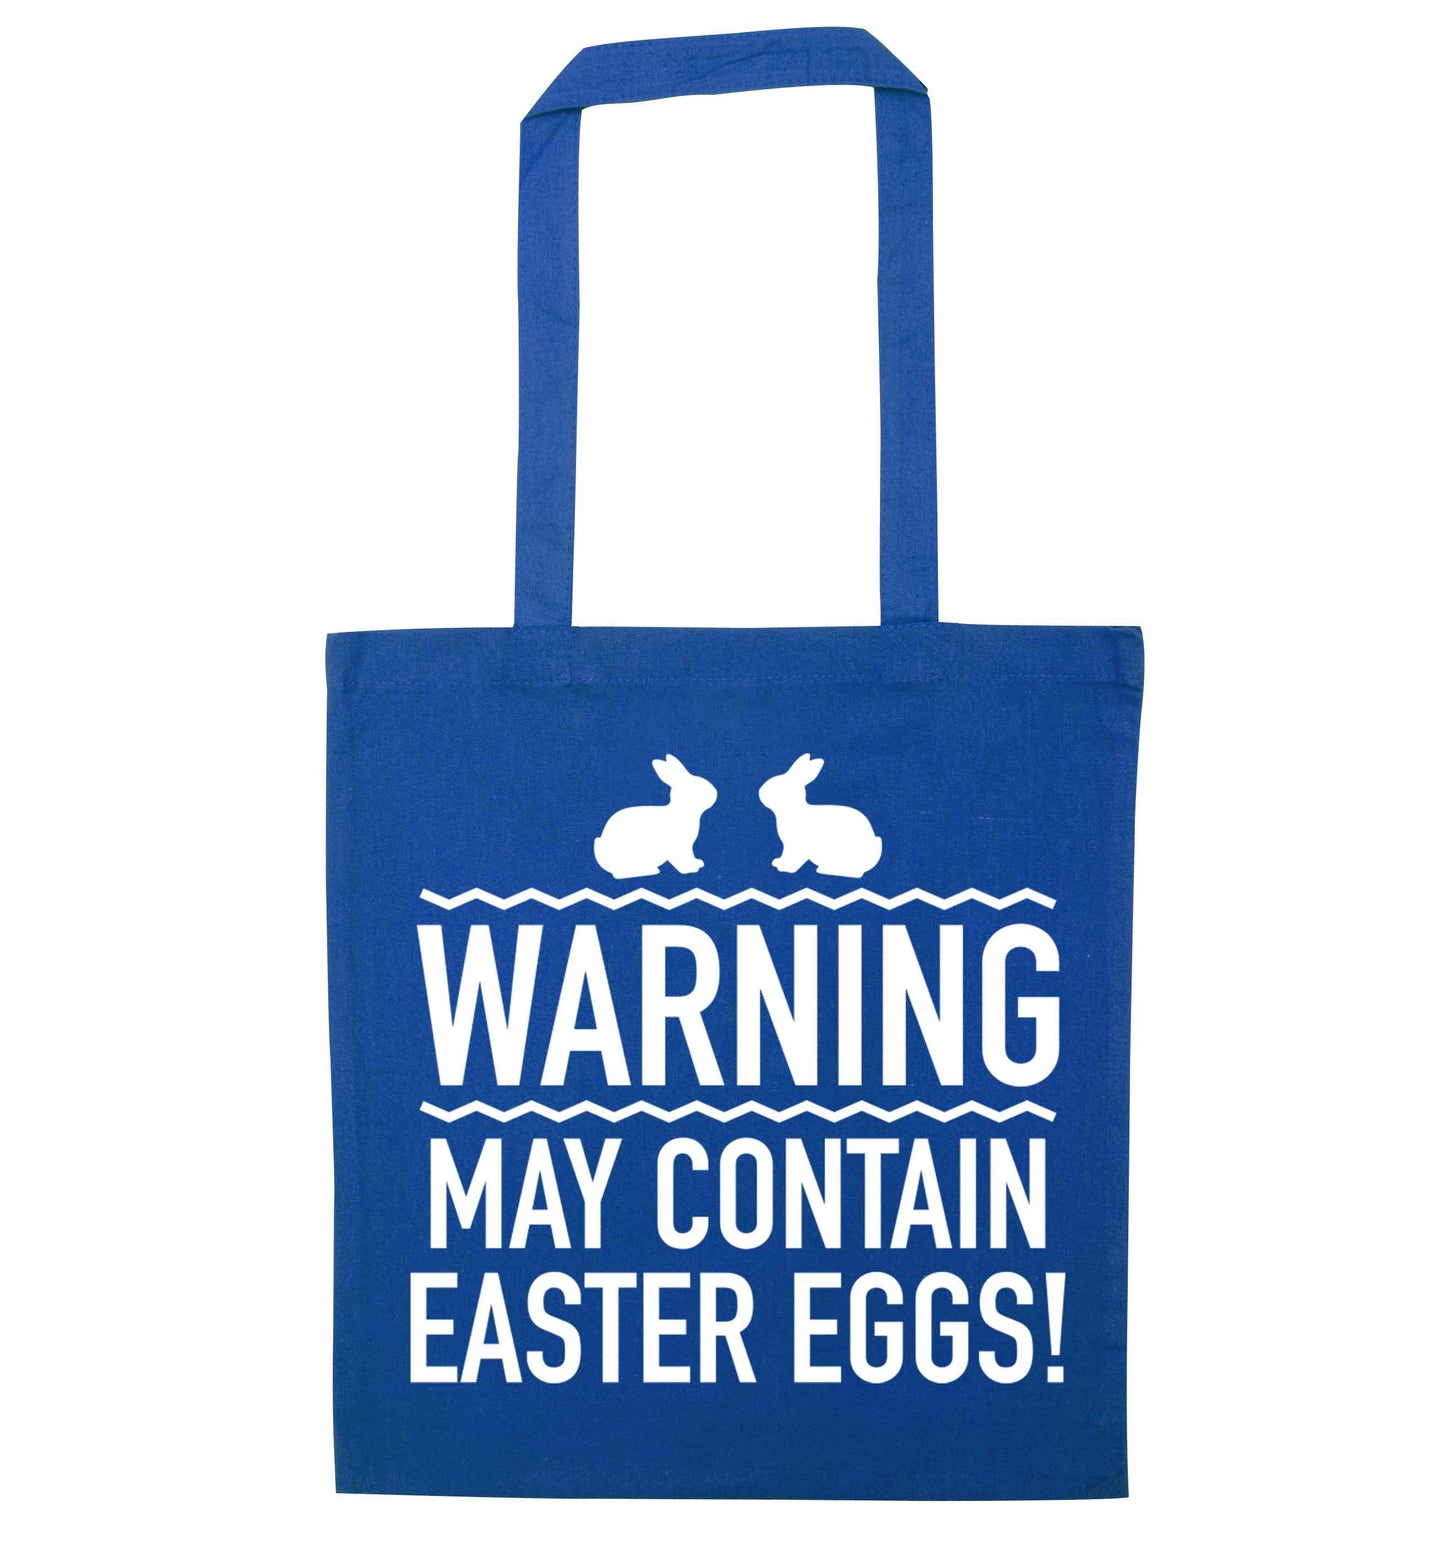 Warning may contain Easter eggs blue tote bag